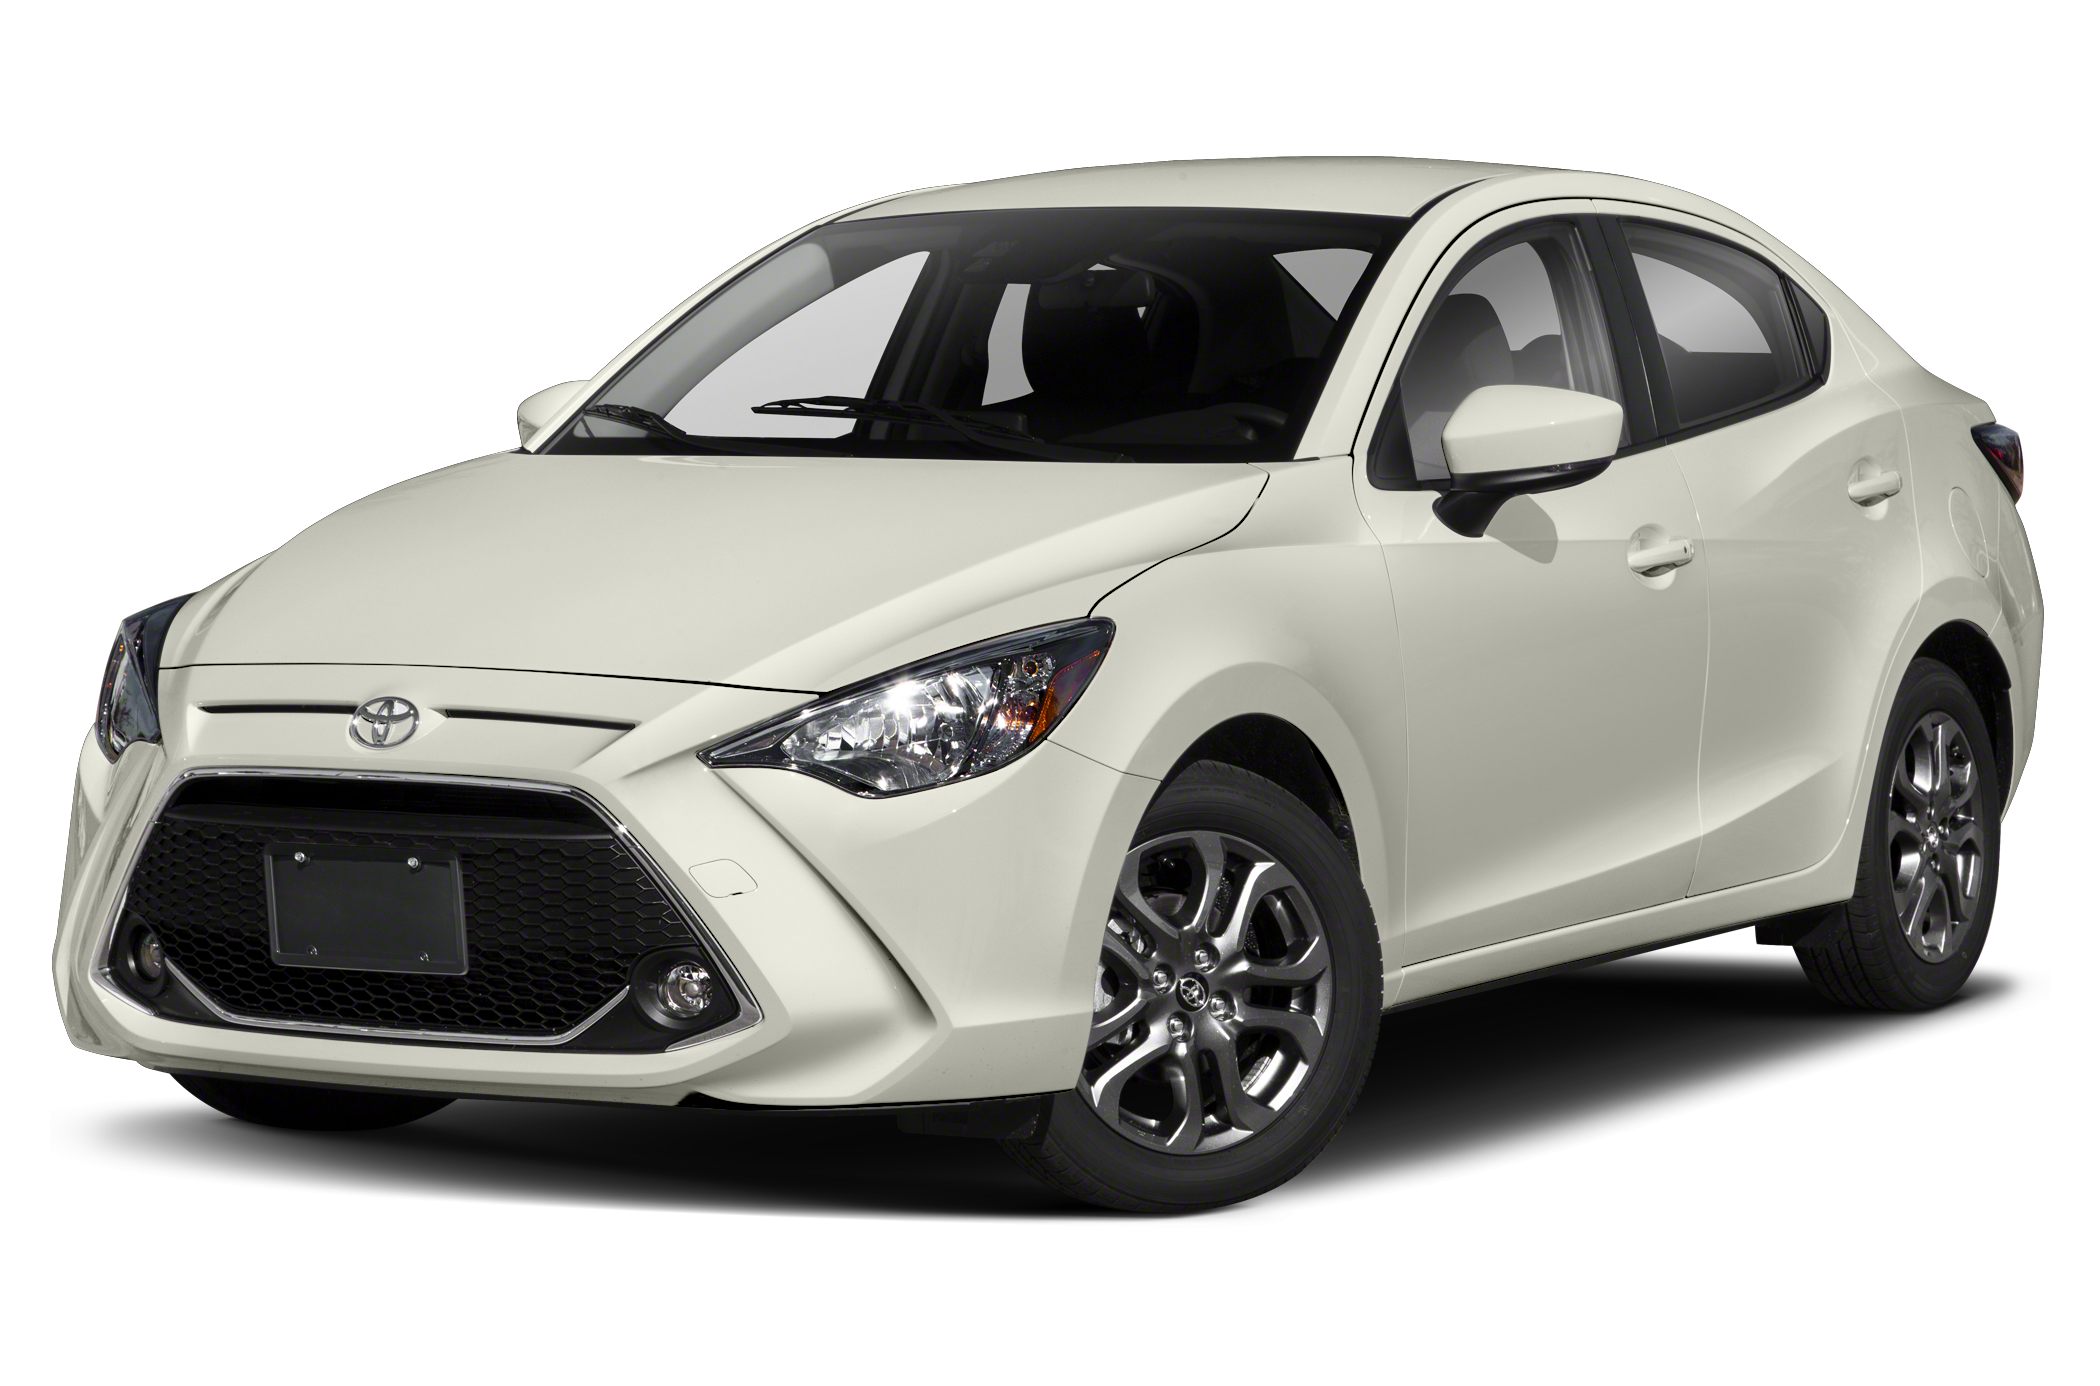 2020 Toyota Yaris oem parts and accessories on sale